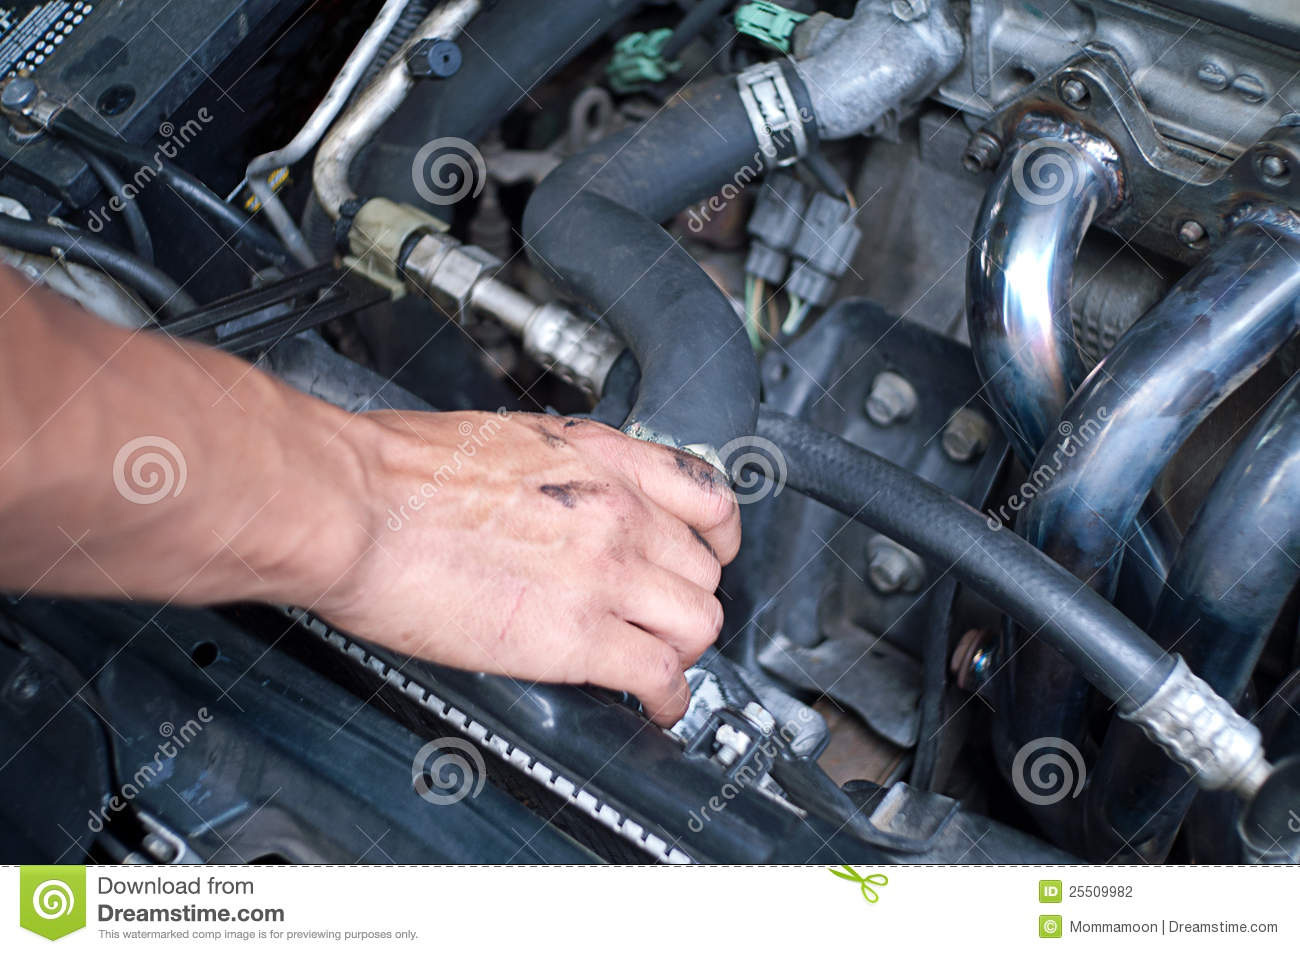 Man S Greese Stained Hand As He Iw Working Under The Hood Of A Car